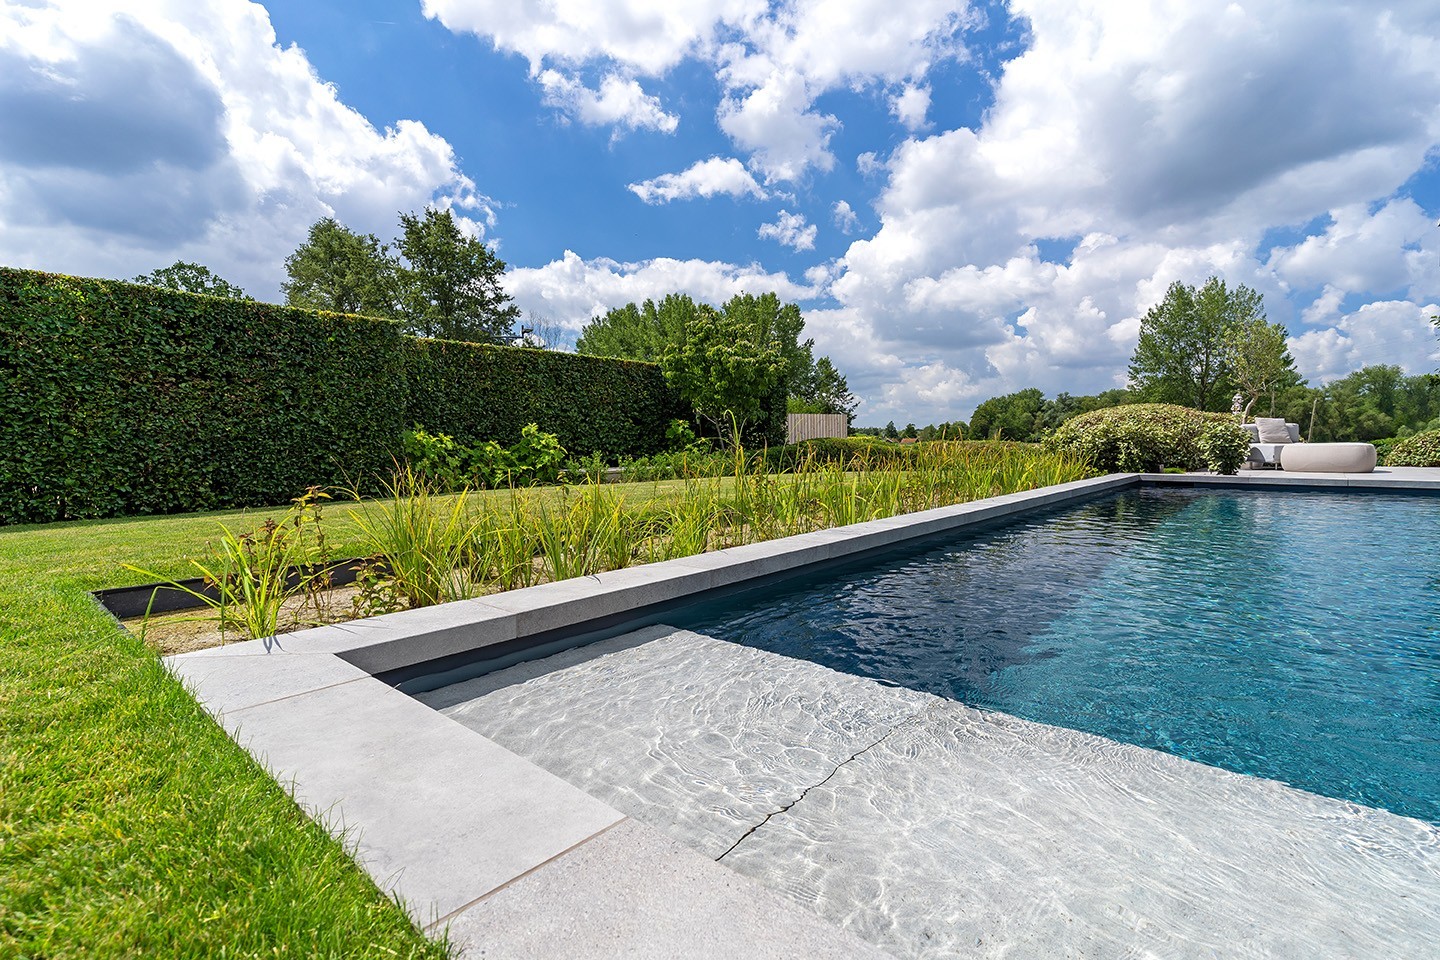 The natural pool fits seamlessly into the garden and terrace